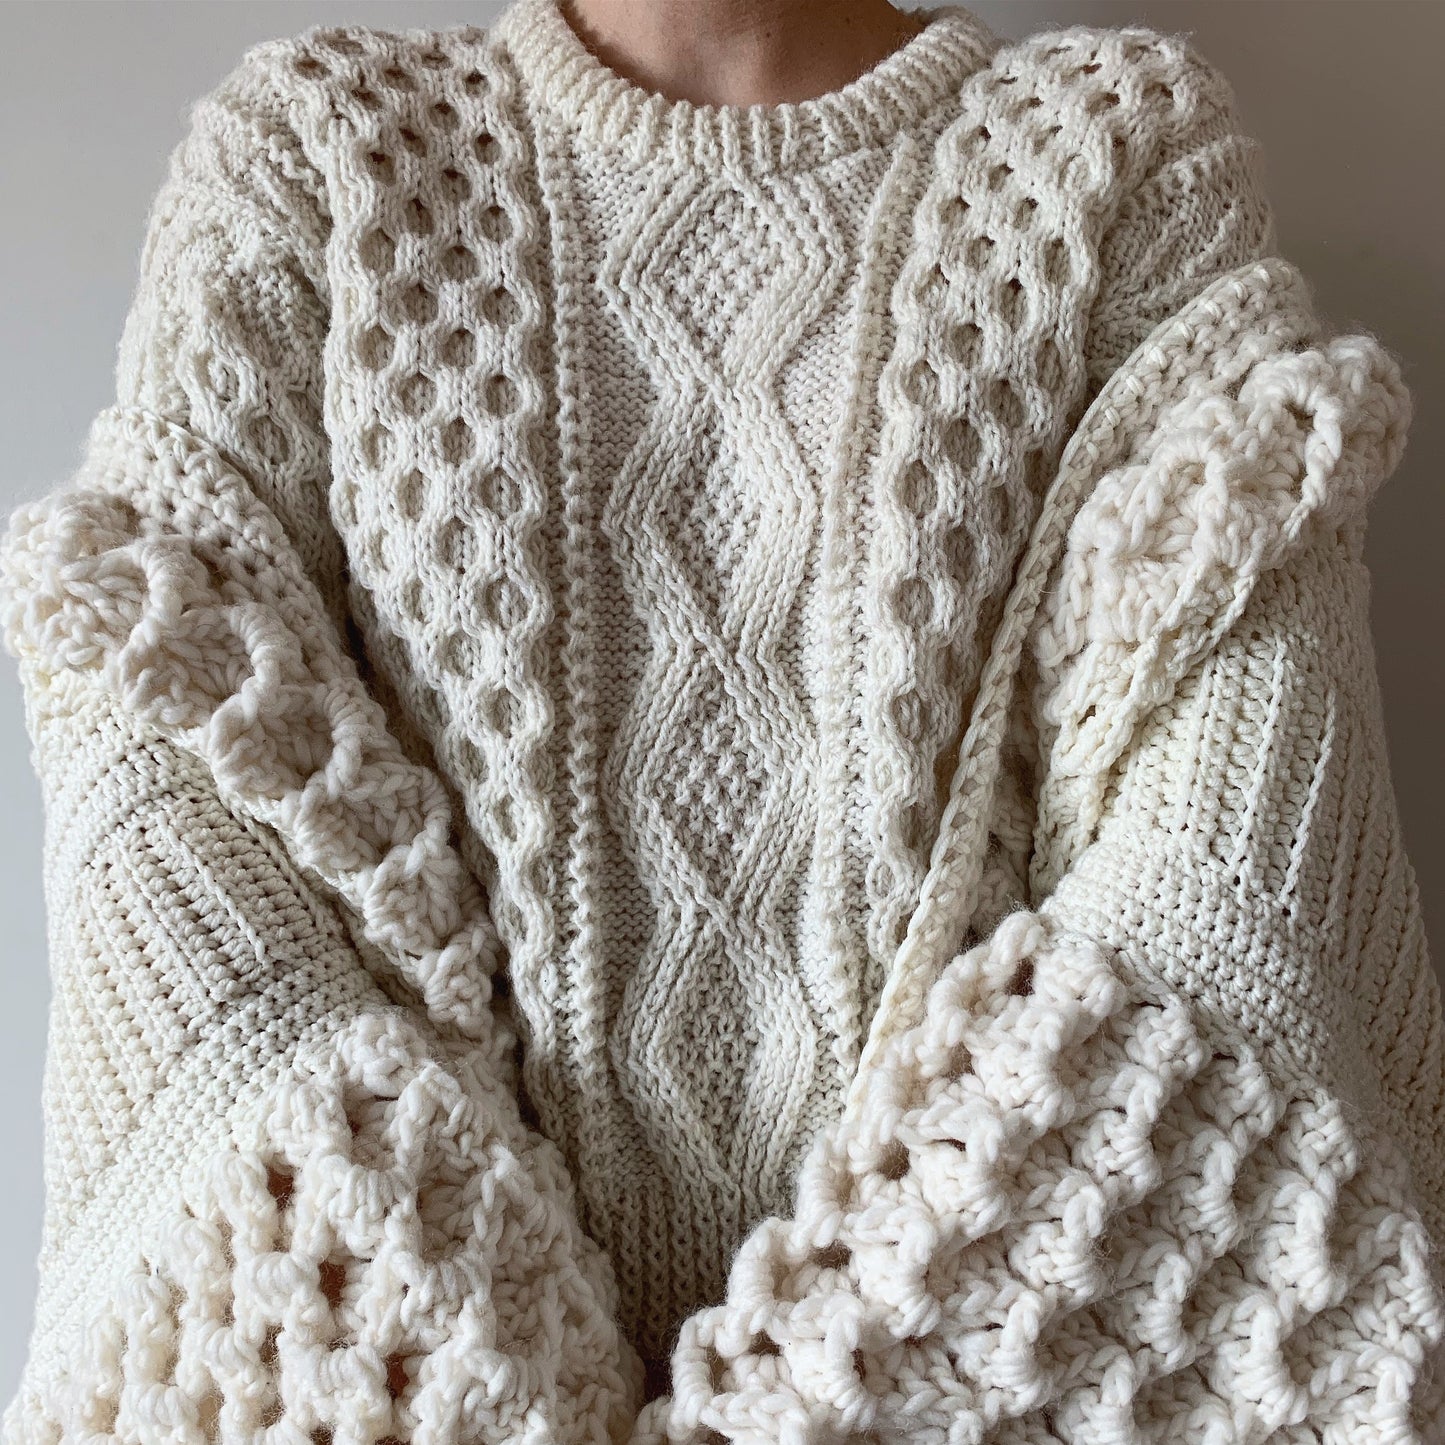 Knit Along with Betsan Corkhill, Di Gilpin and Sheila Greenwell, Donna Wilson, Lesley O'Connell Edwards, Lynn Abrams, Hélène Magnússon, John Arbon Textiles, Amy Swanson of June Cashmere, Vawn Corrigan